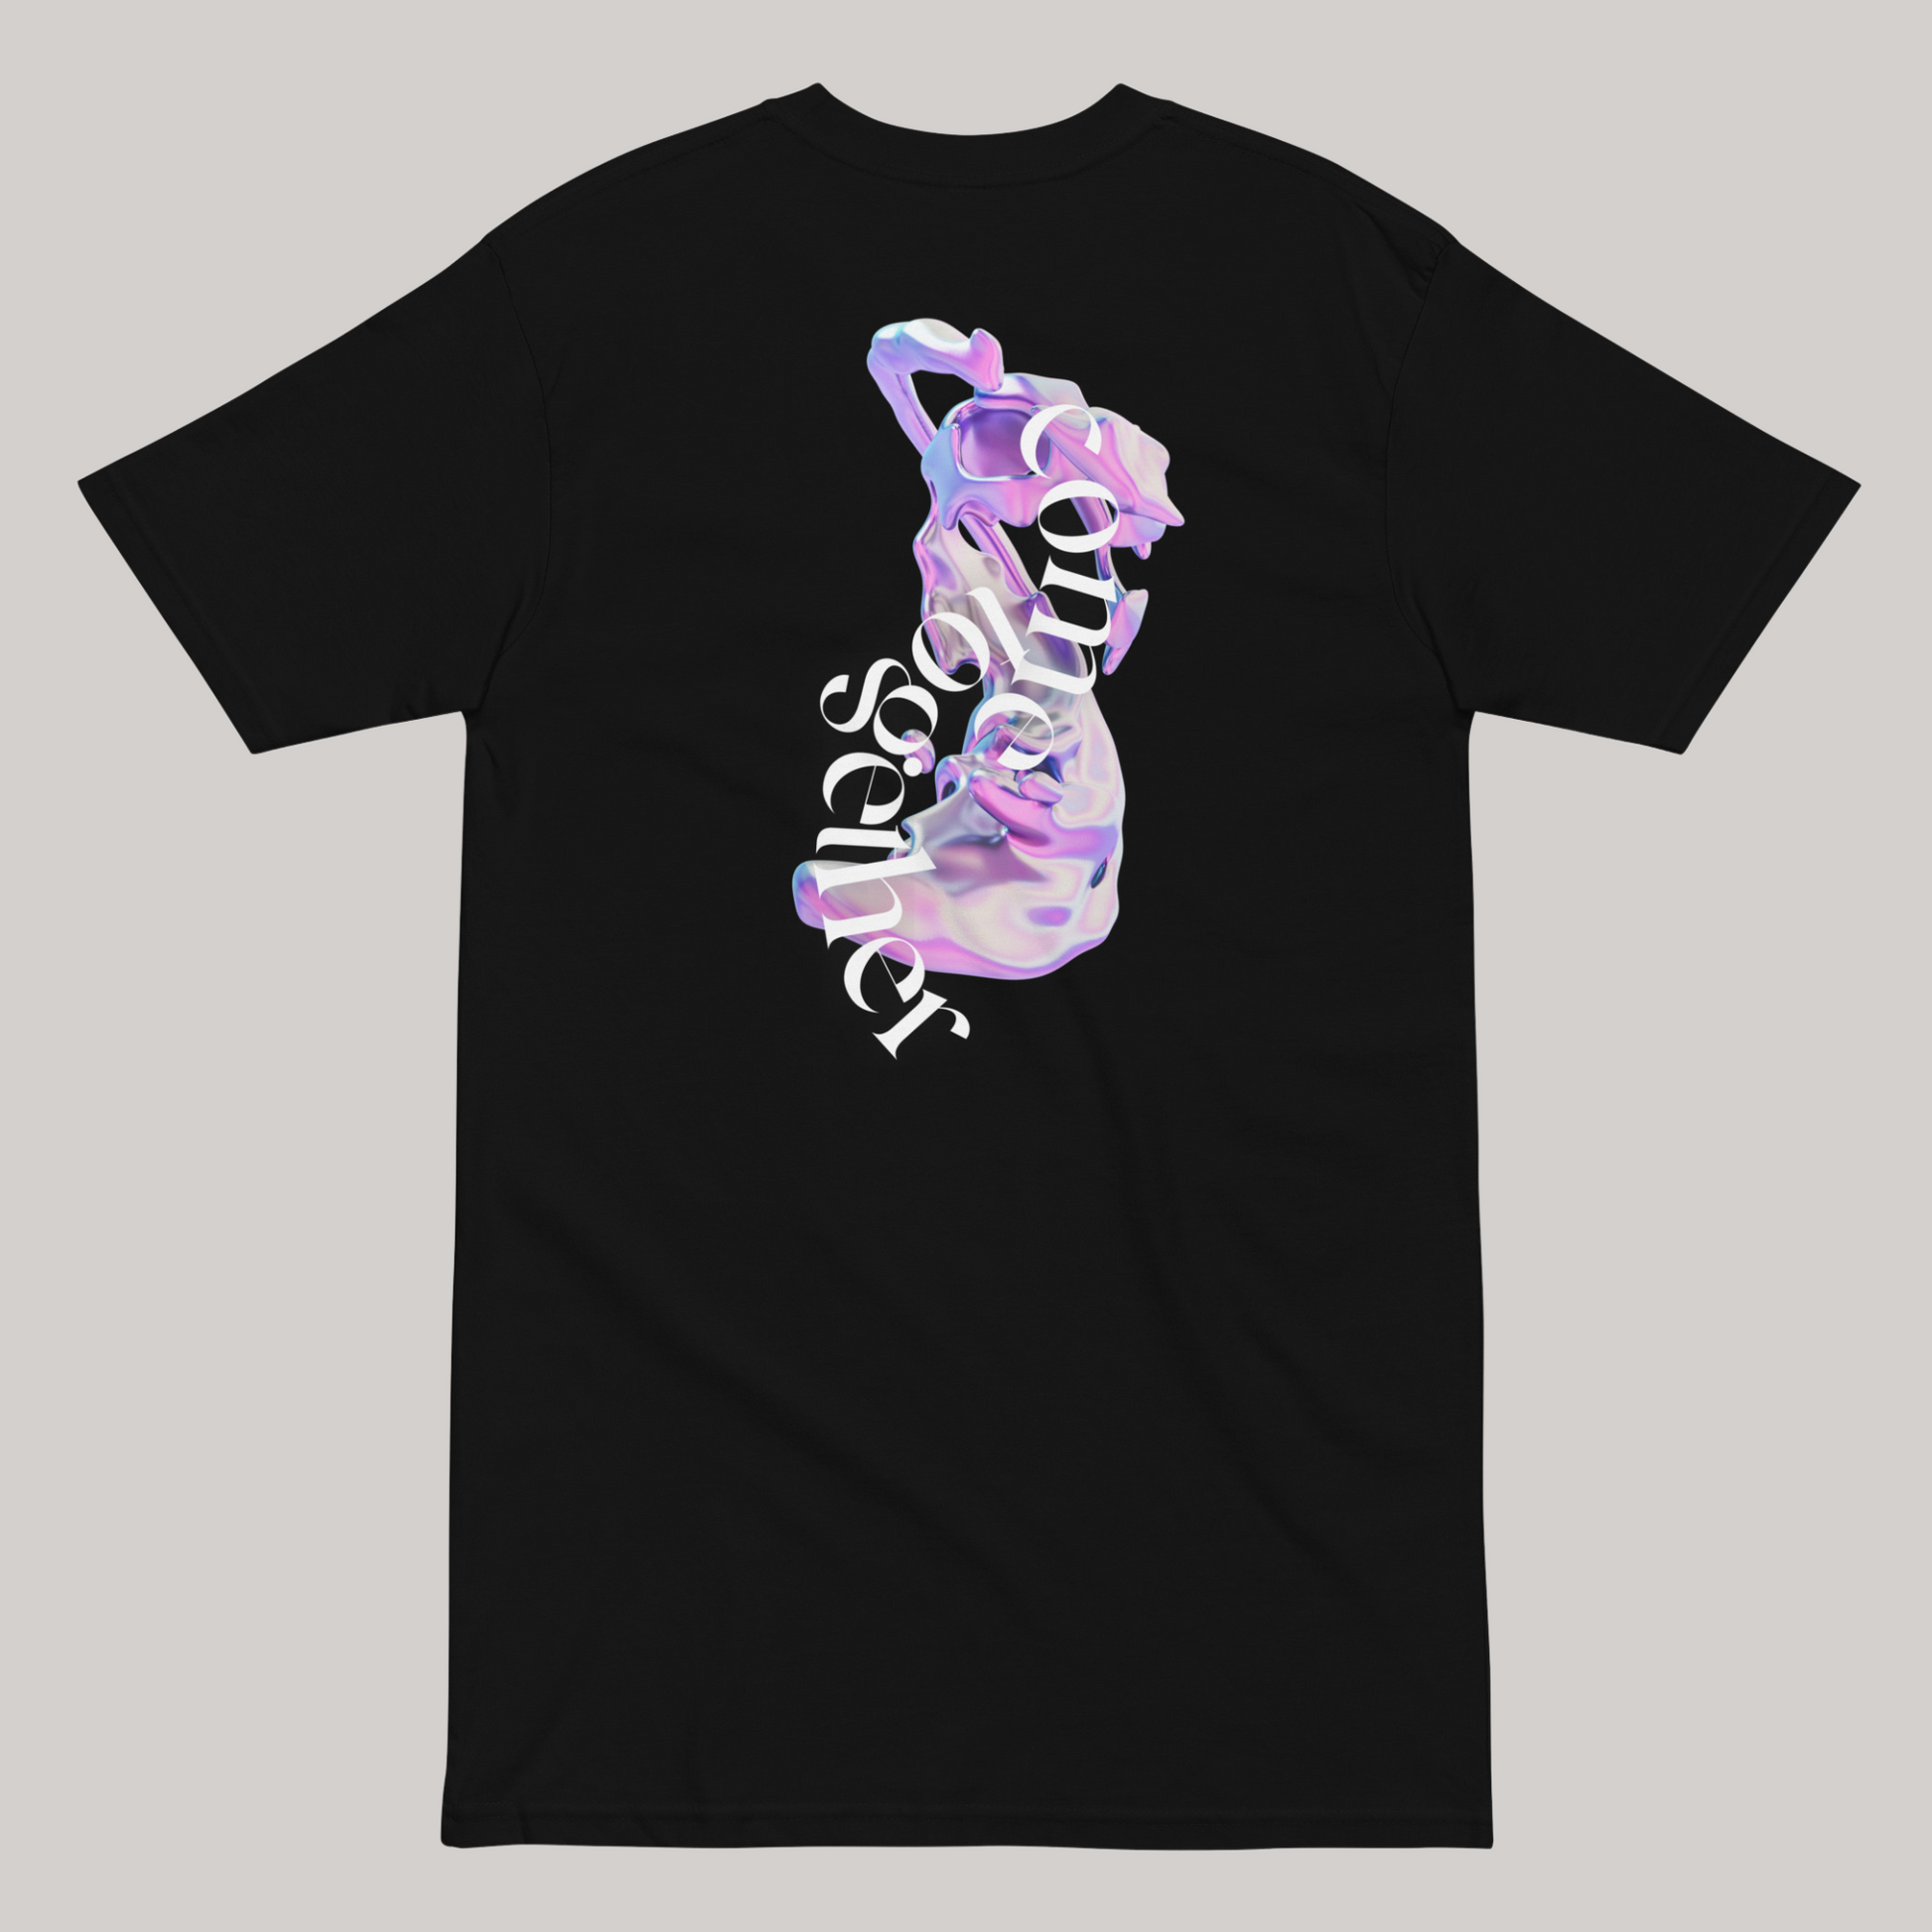 Graphic Tees, Graphic T-Shirts & Hoodies